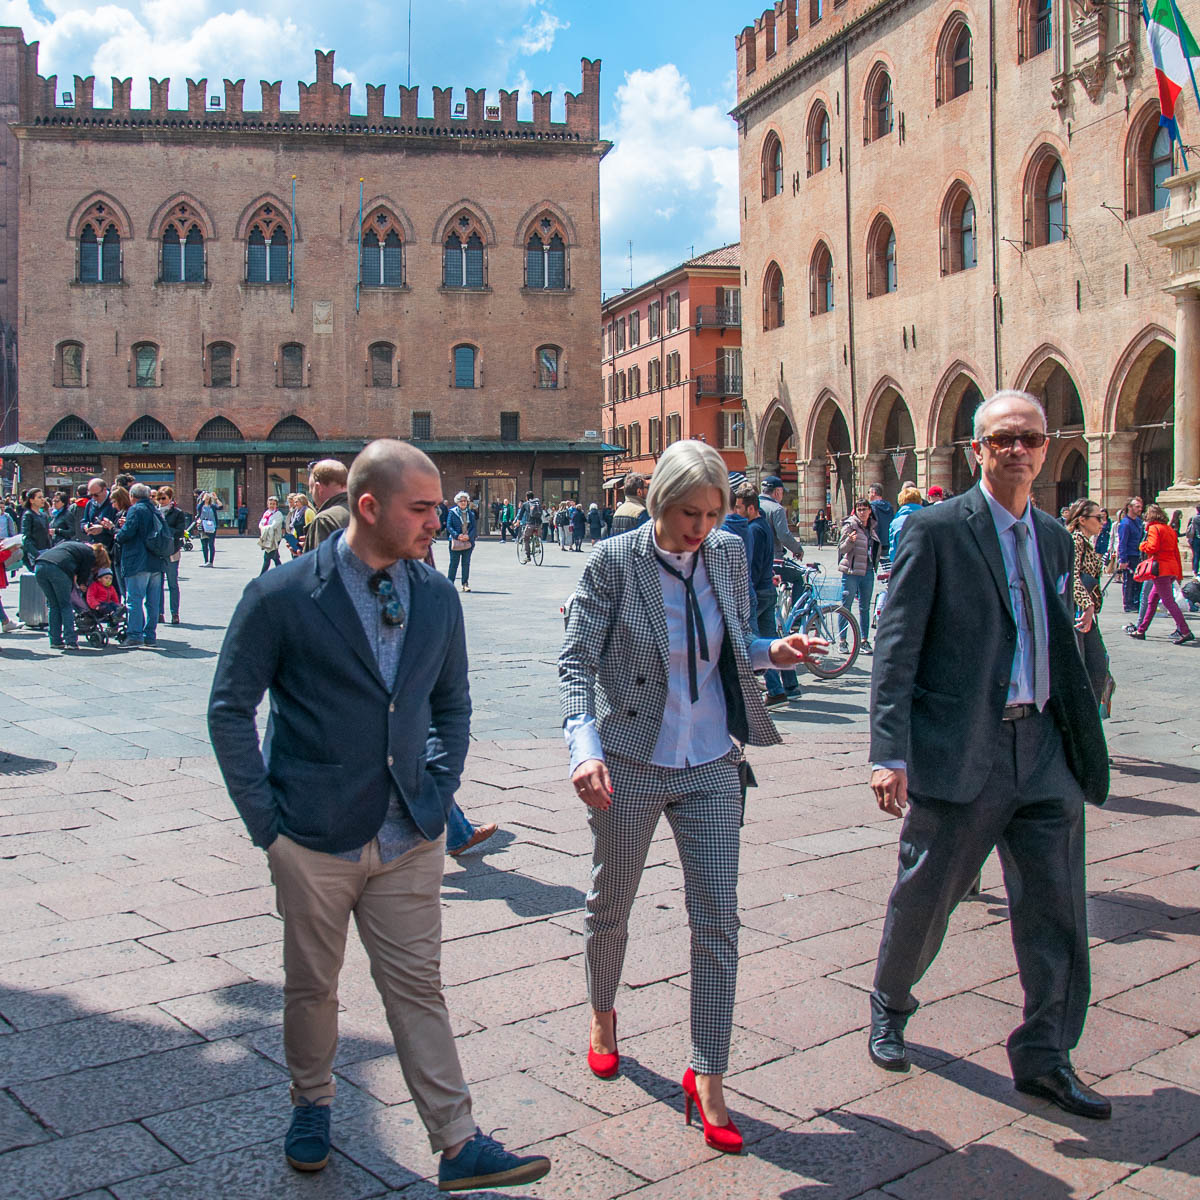 A lively square and a lady with red shoes - Bologna, Emilia-Romagna, Italy - www.rossiwrites.com